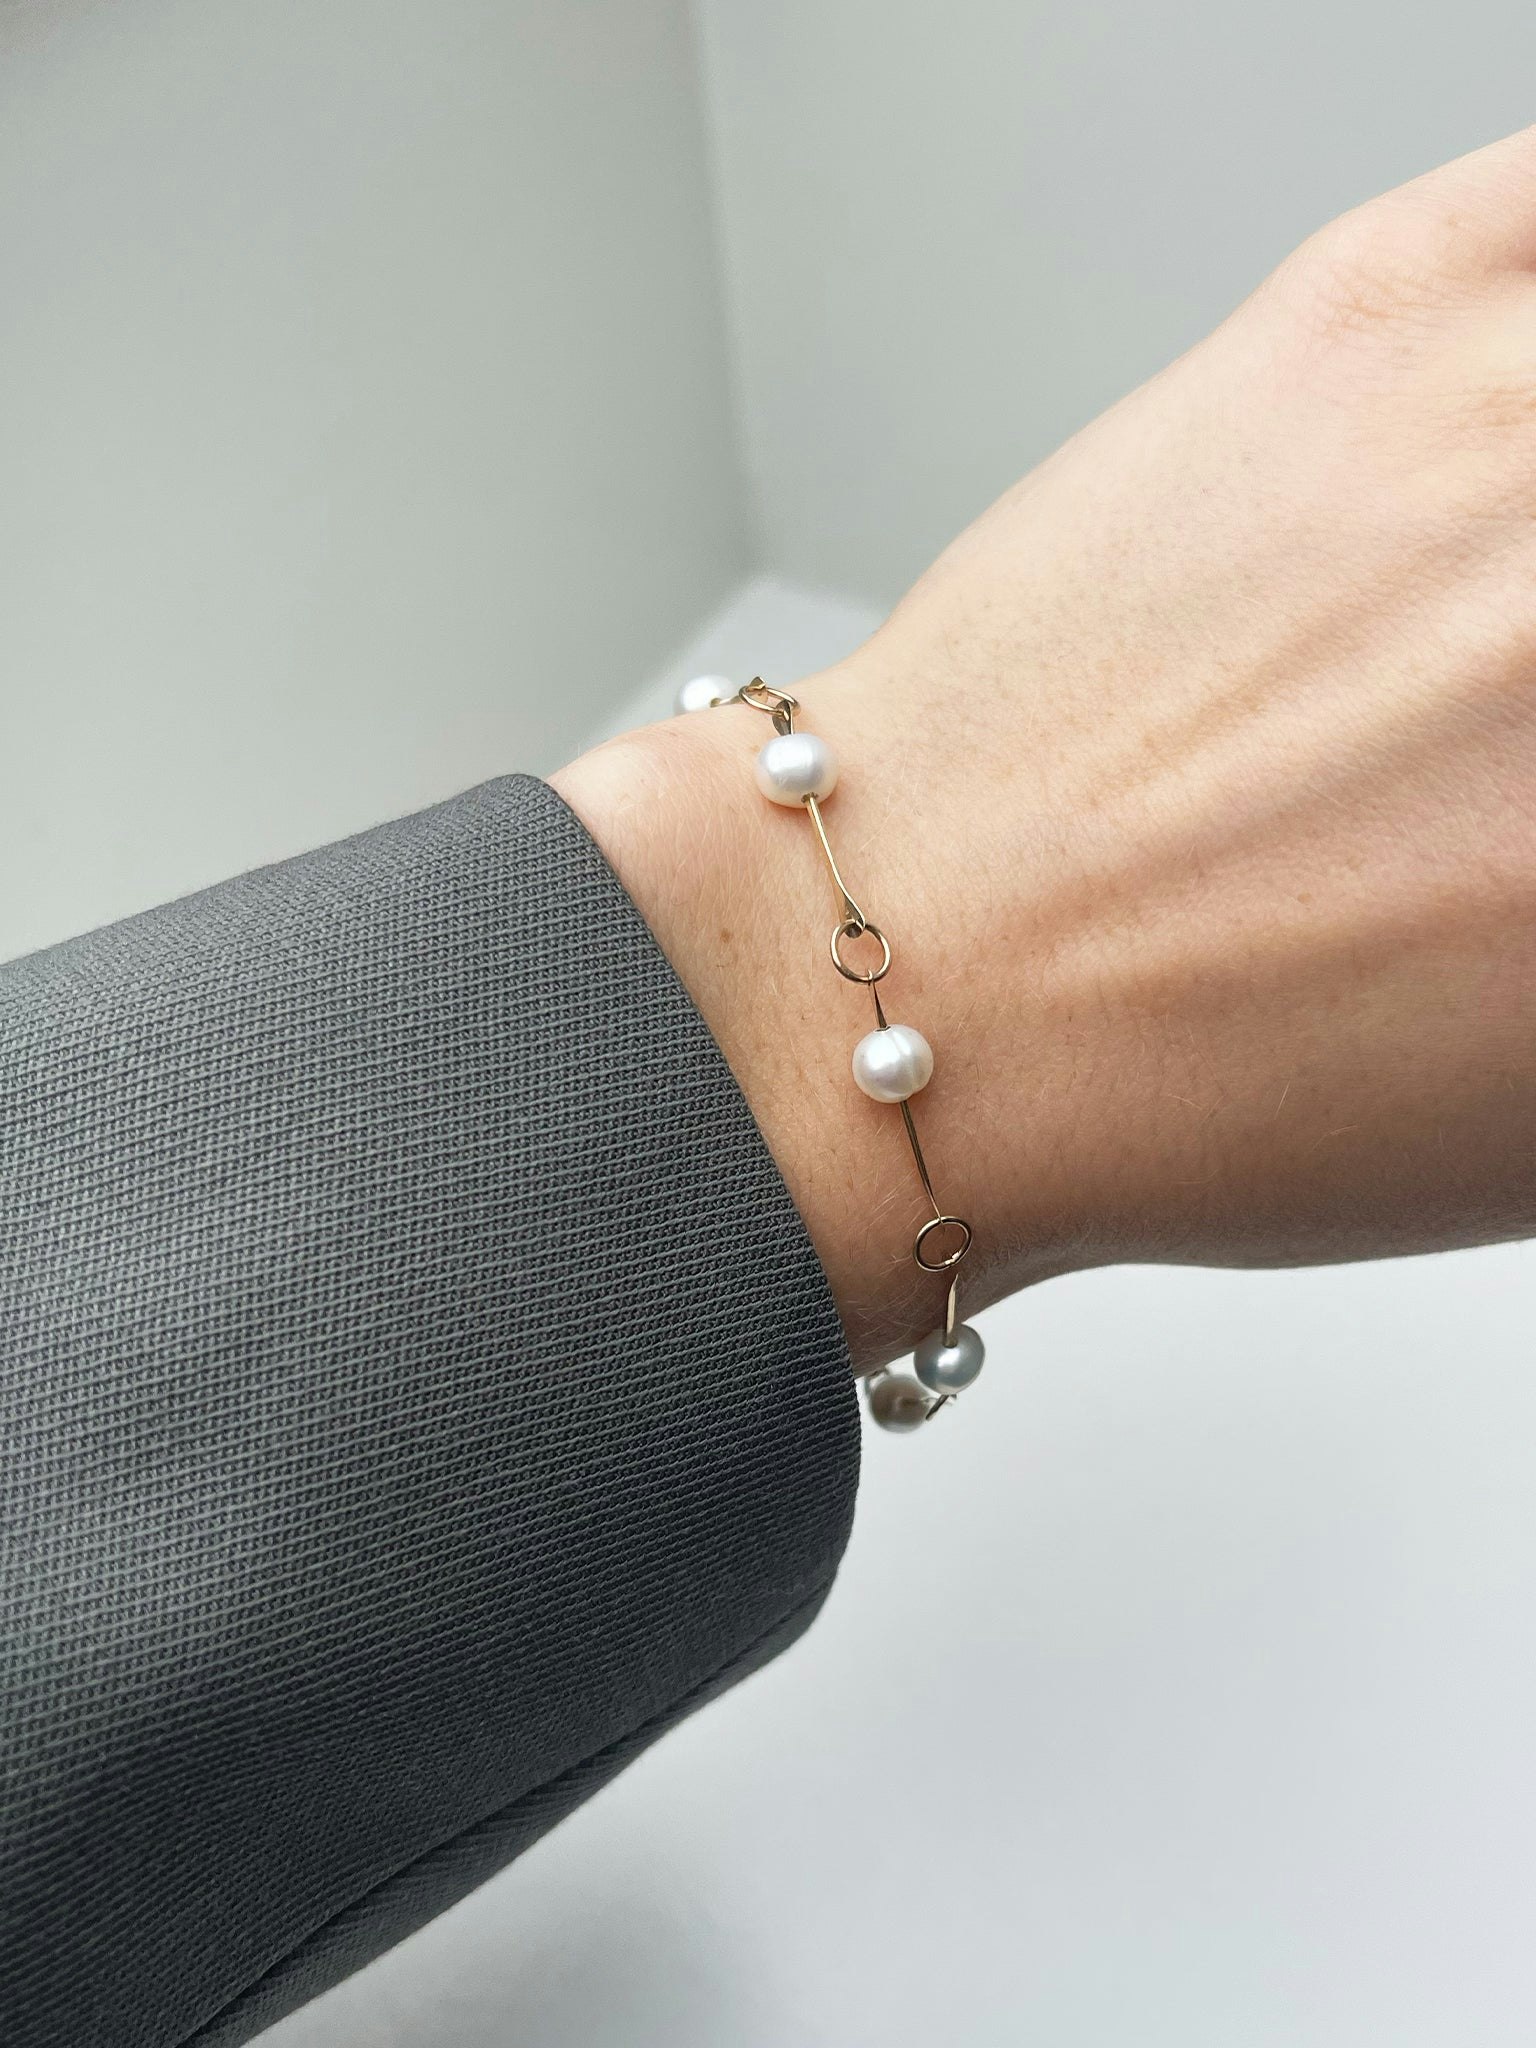 Bone chain bracelet with floating pearls photo 2